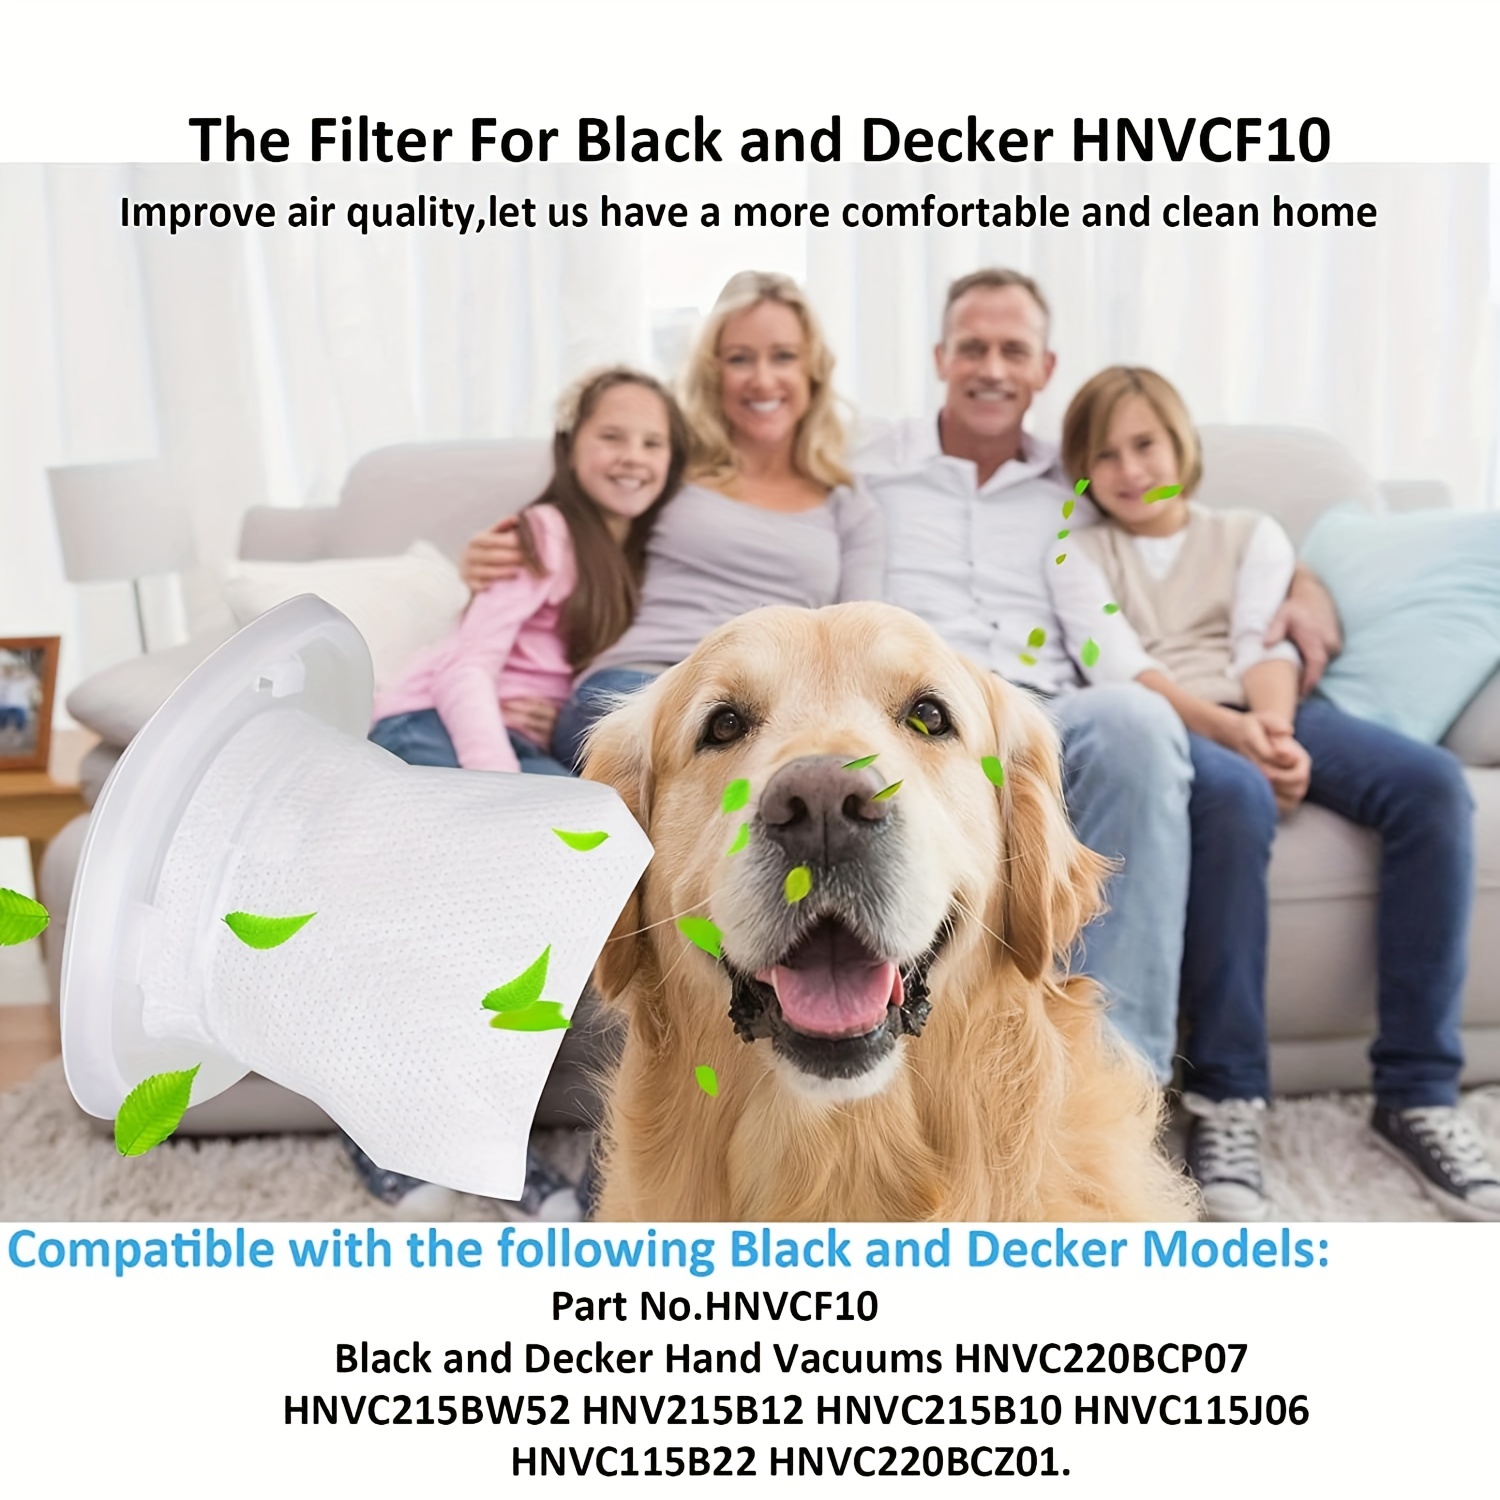 6 Pack Replacement Filter for Black & Decker Dustbuster